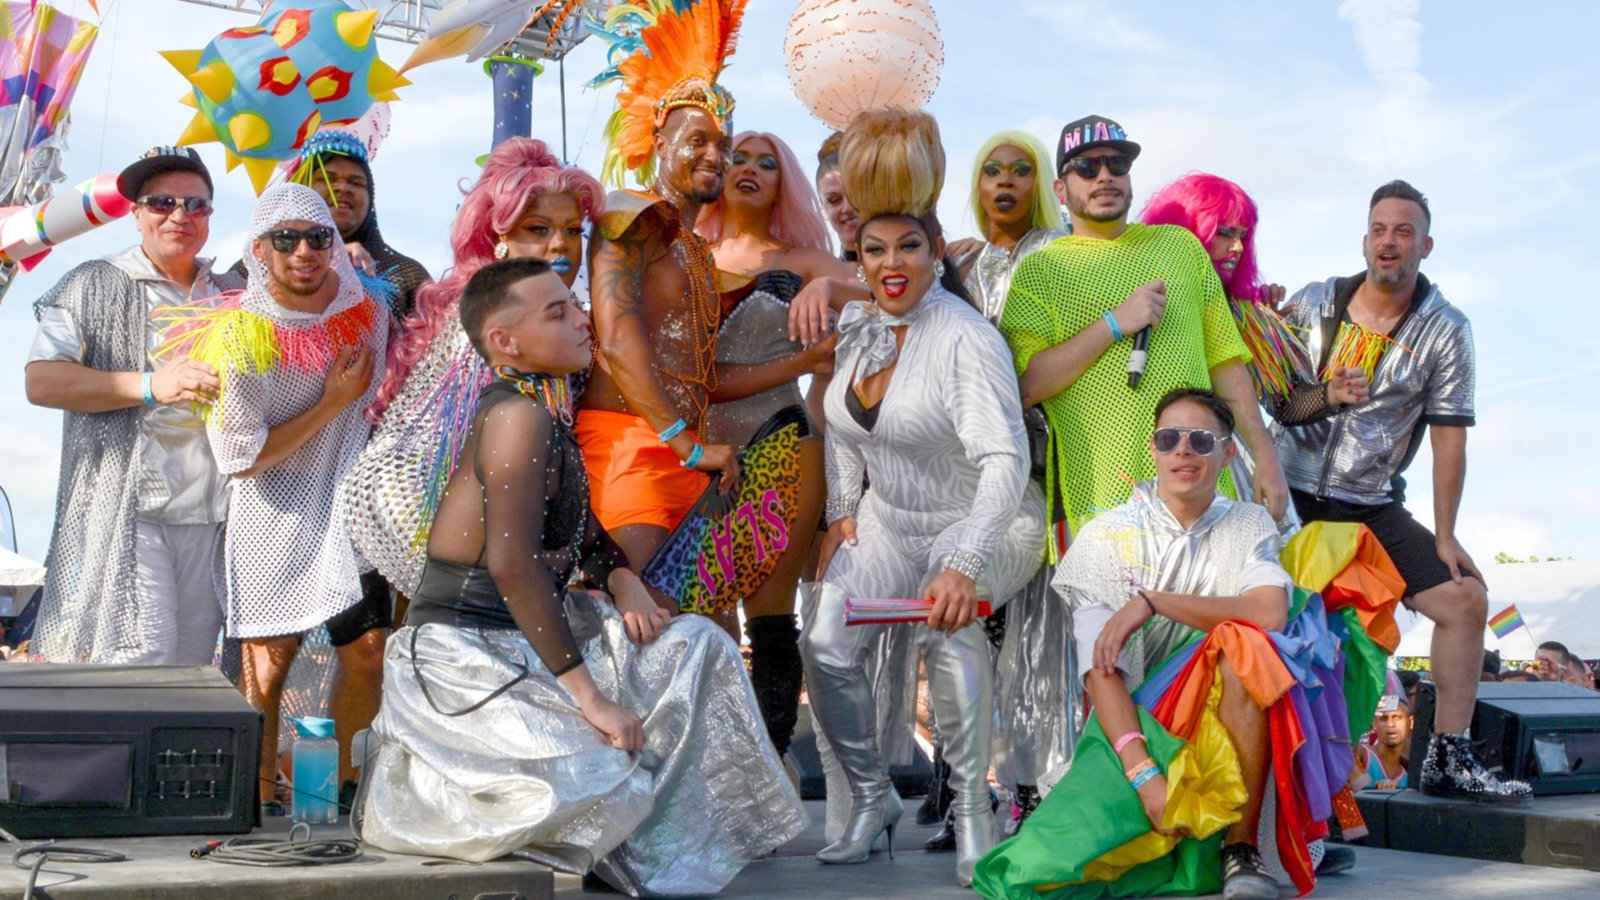 For the fiercest drag queens competing, head to the Miss Miami Beach event